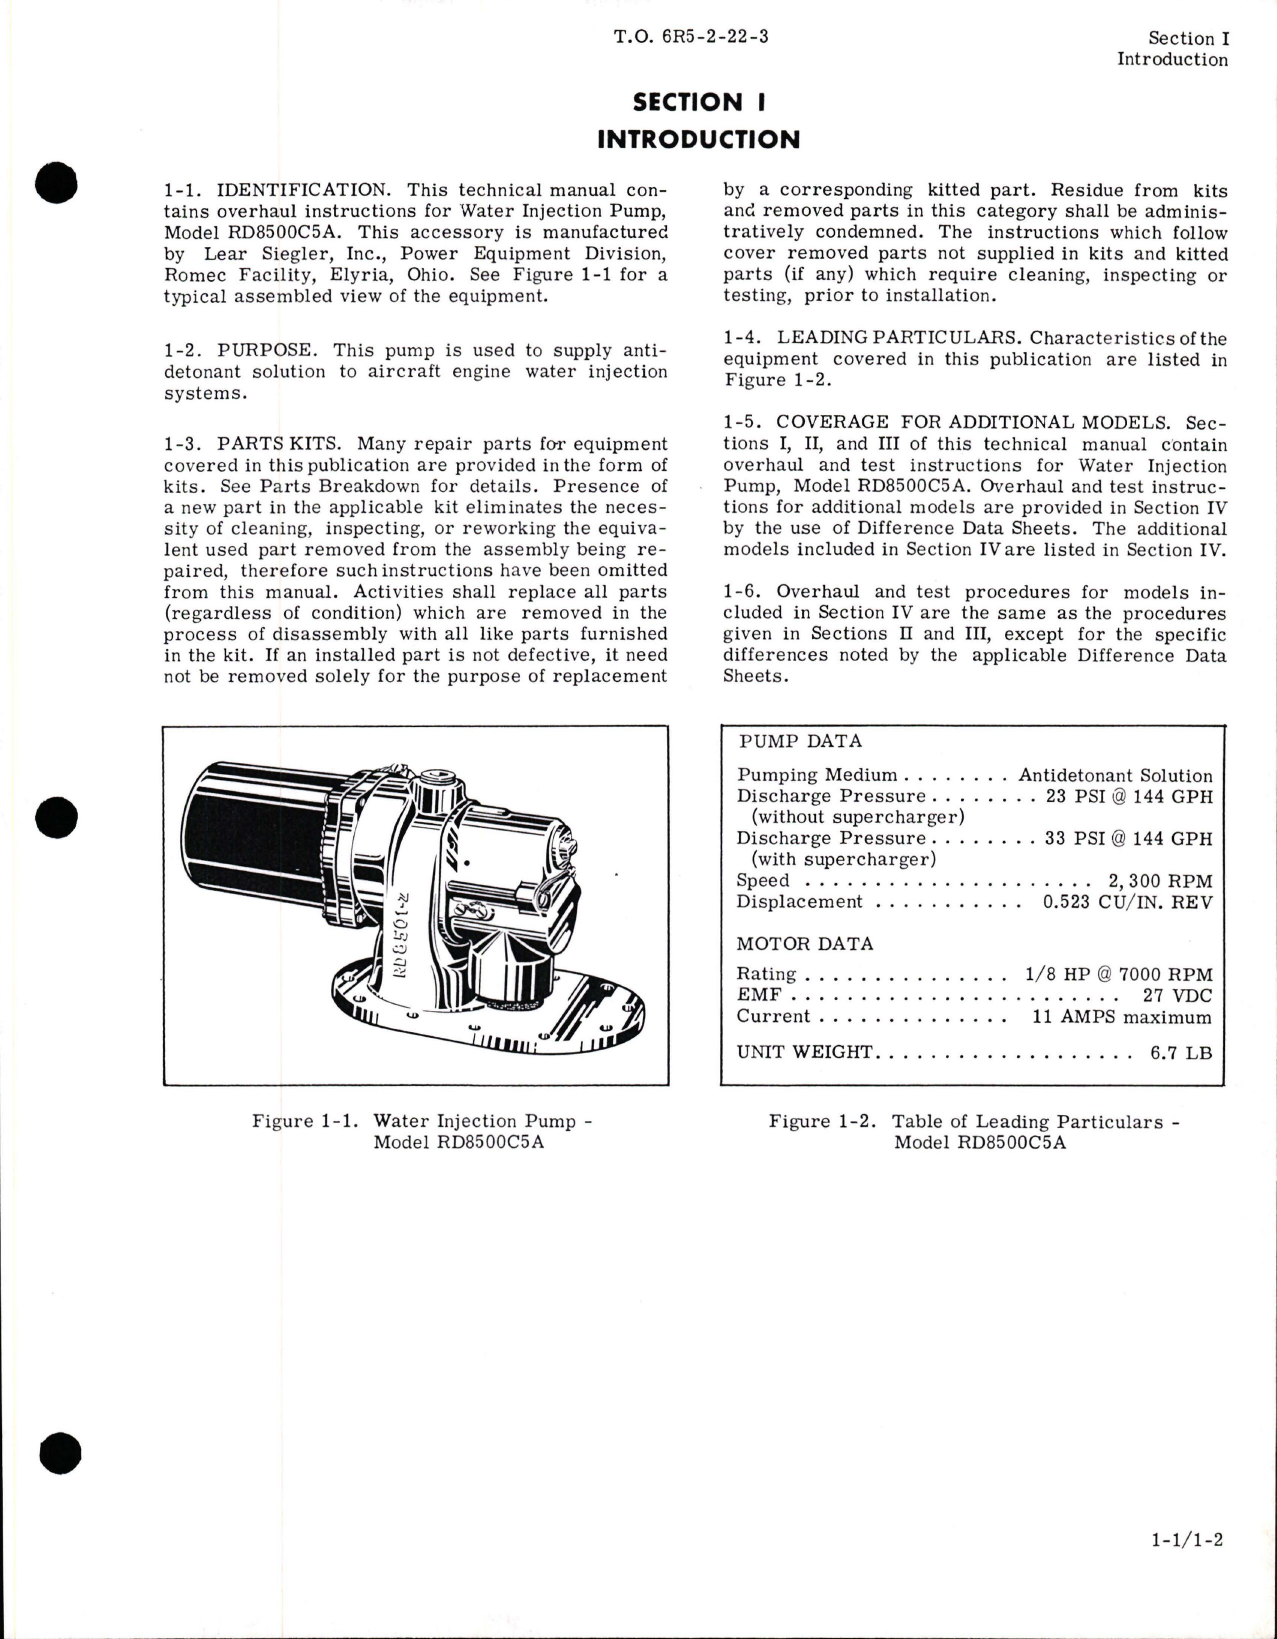 Sample page 5 from AirCorps Library document: Overhaul for Water Injection Pump - Model RD8500 Series 